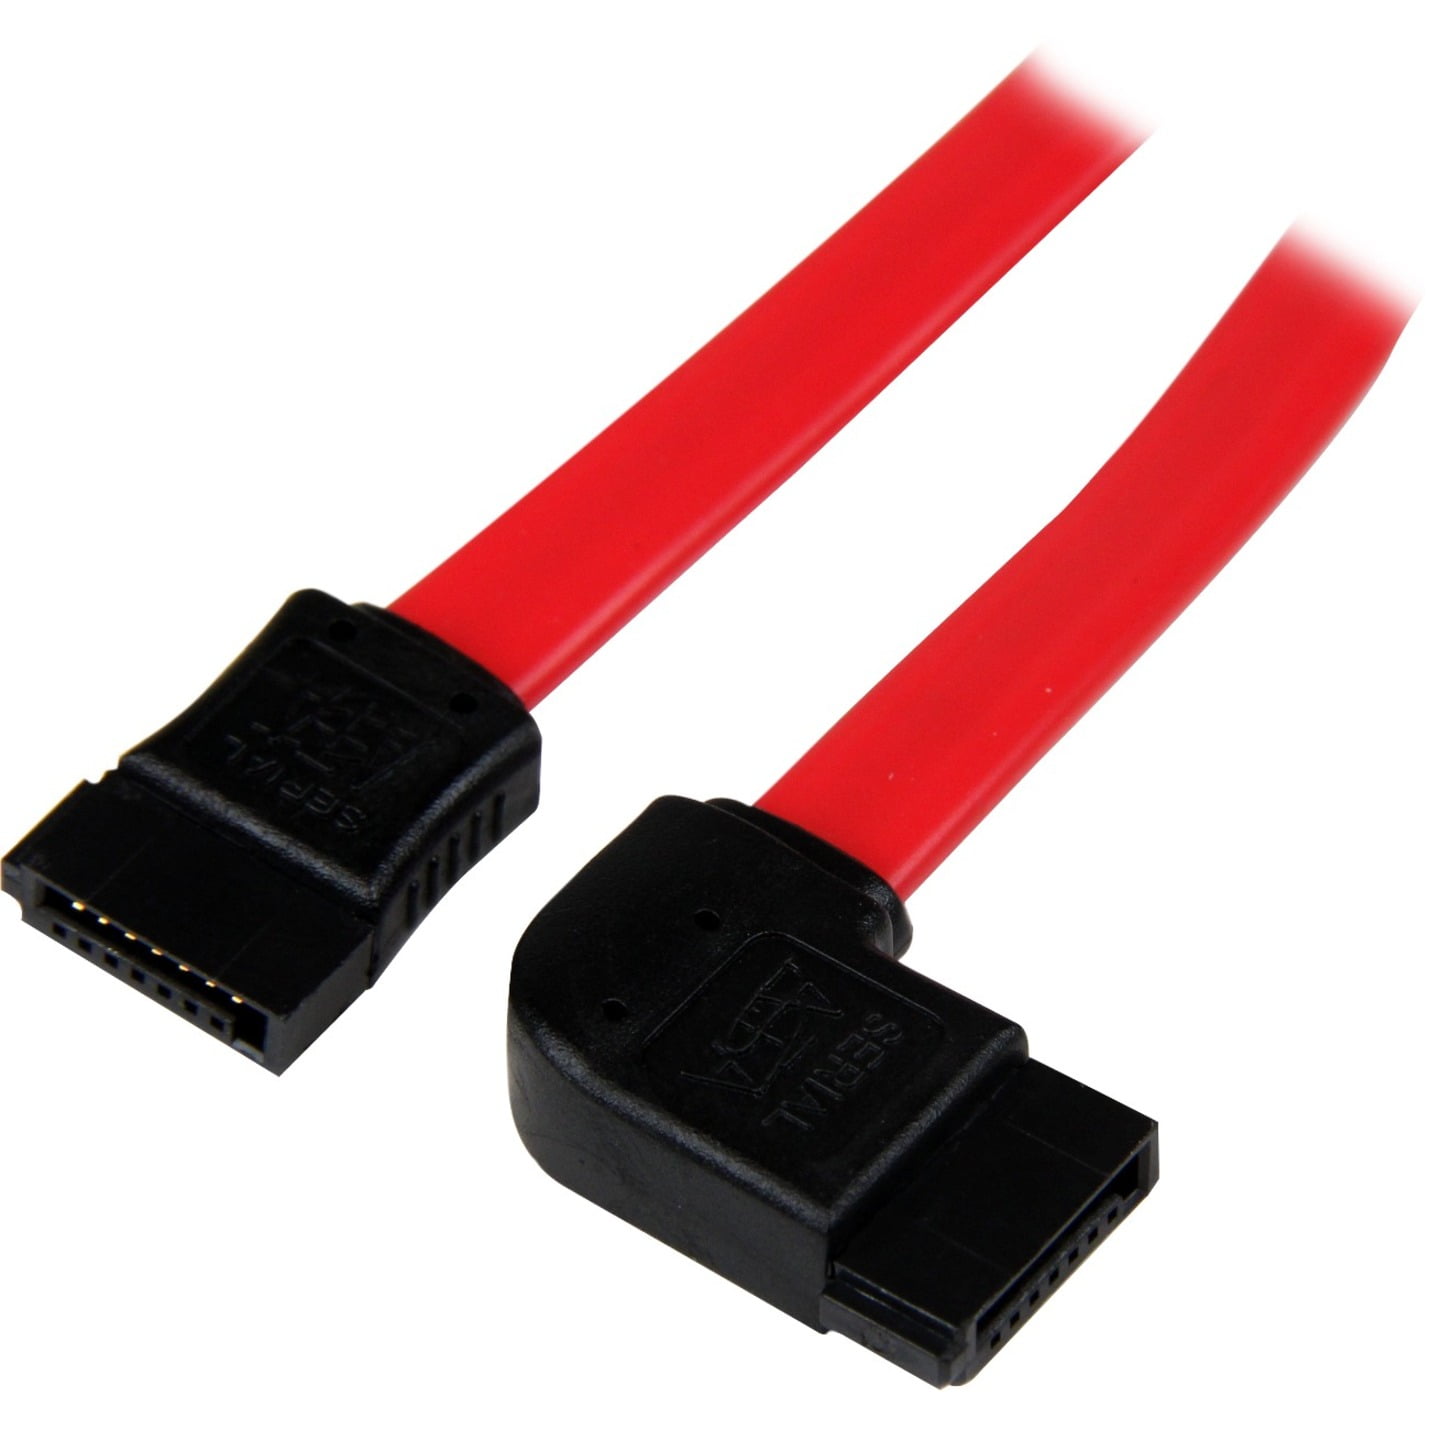 w/ Locking Latch Pack of 200 Box of VCOM CH301-39INCH 39inch SATA2 to SATA2 Cable